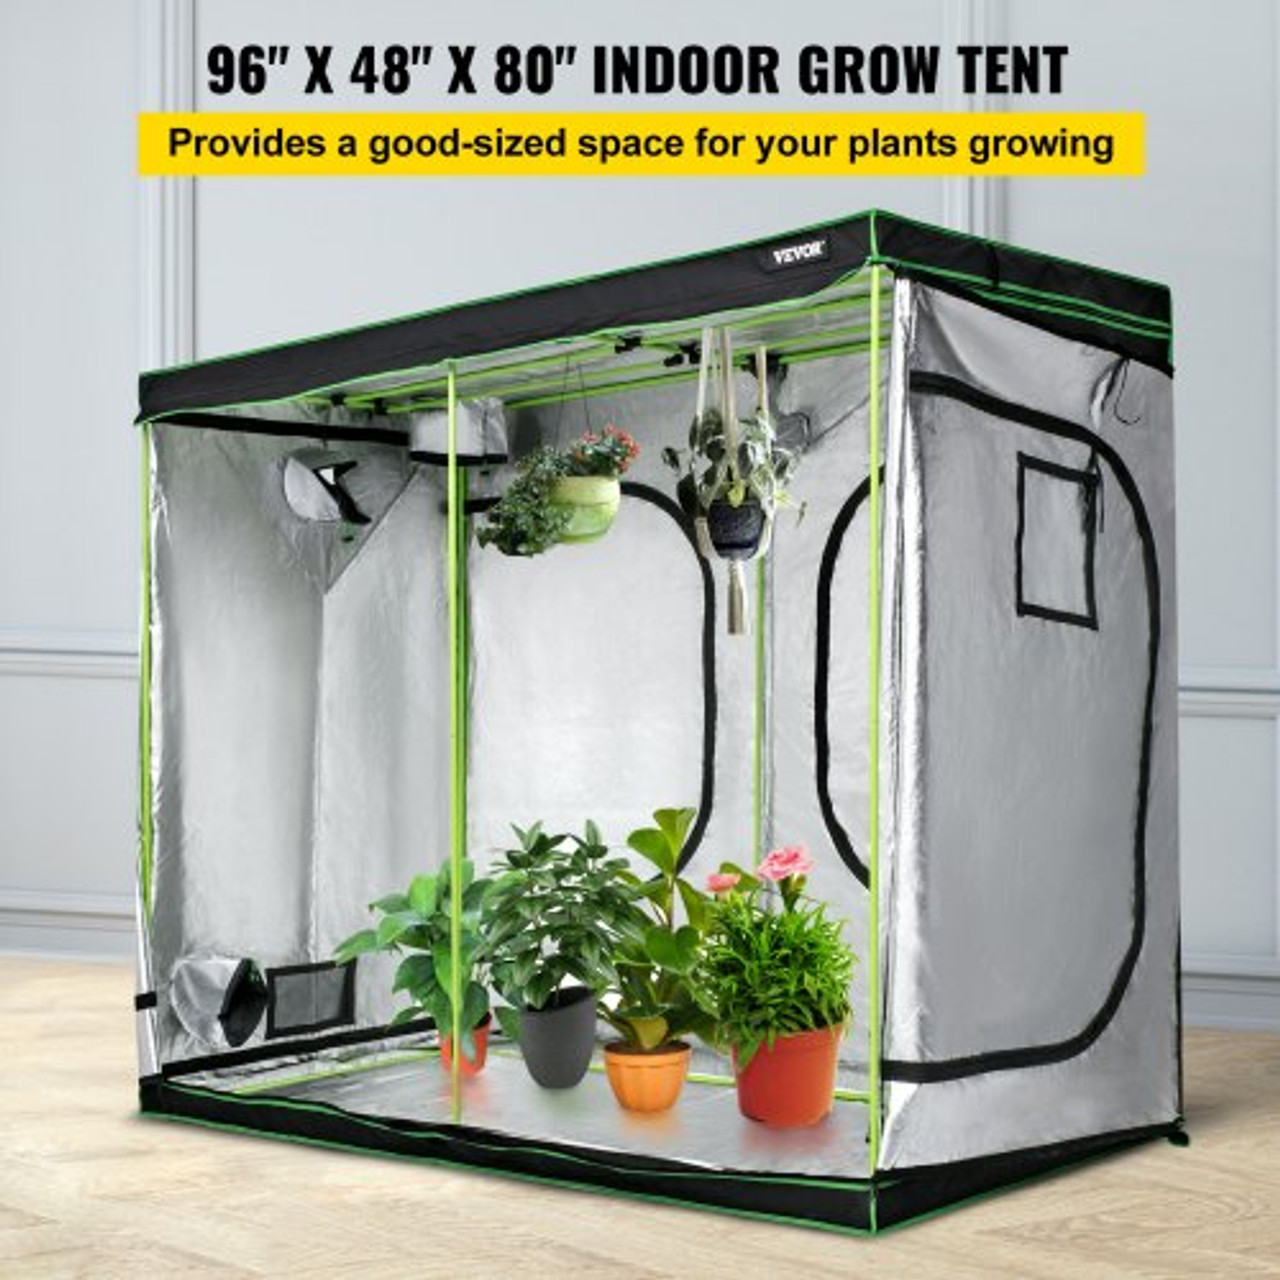 Grow Tent, 96" x 48" x 80" Hydroponics Mylar Grow Room with Observation Windows and Removable Floor Tray, 100% Lightproof Large Grow Closet for Indoor Plants Growing, 8'x4' Reflective Plant Tent